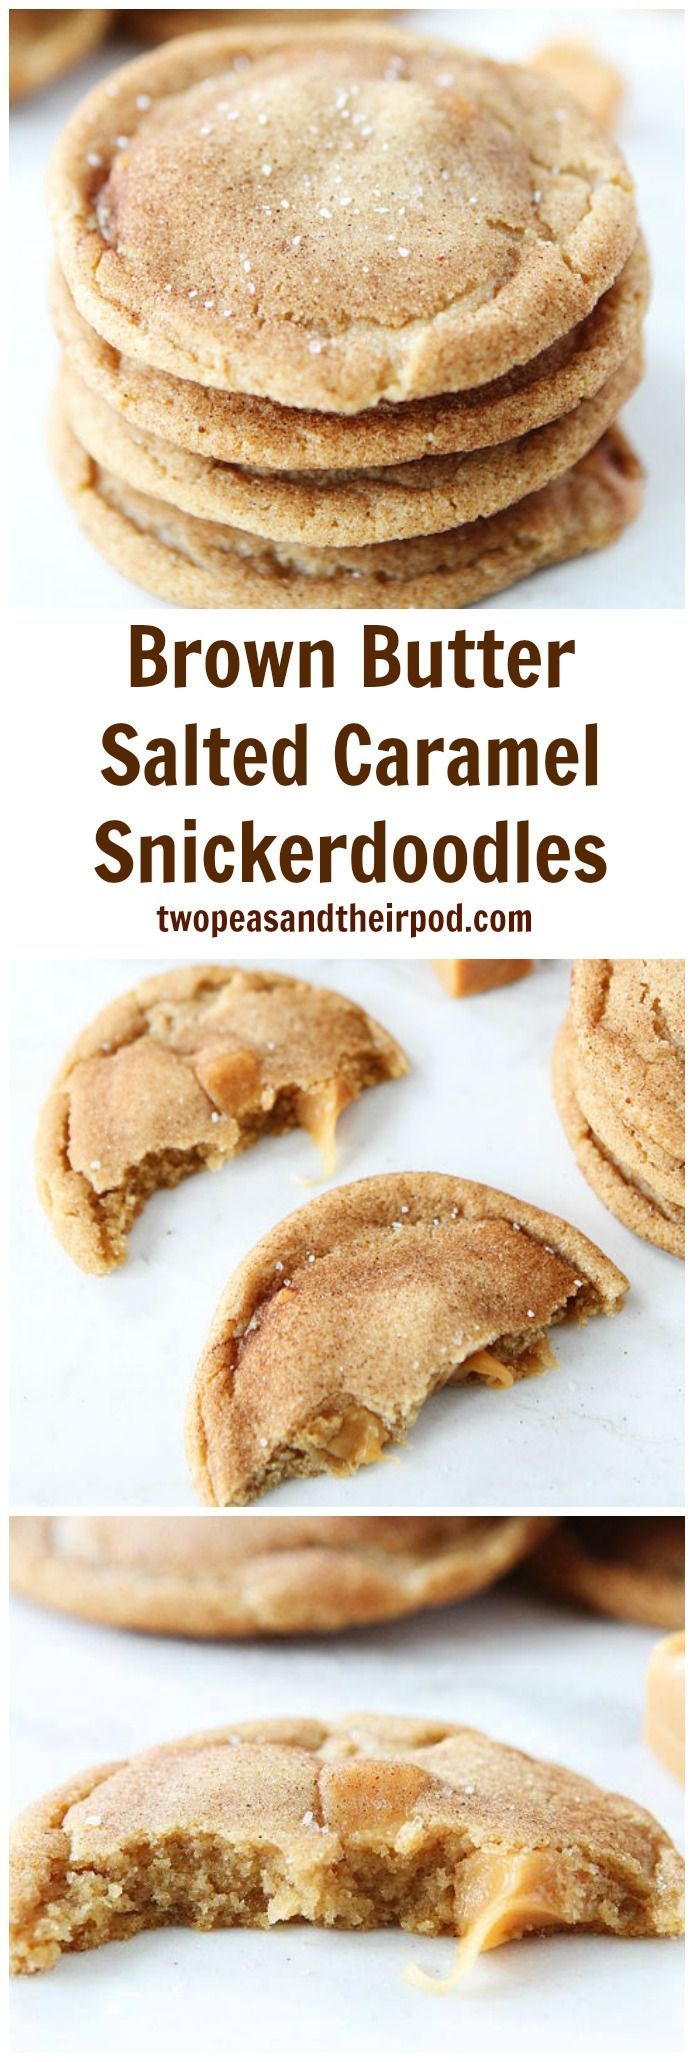 Brown Butter Salted Caramel Snickerdoodles Recipe on twopeasandtheirpo… The BEST snickerdoodle recipe! Everyone LOVES these